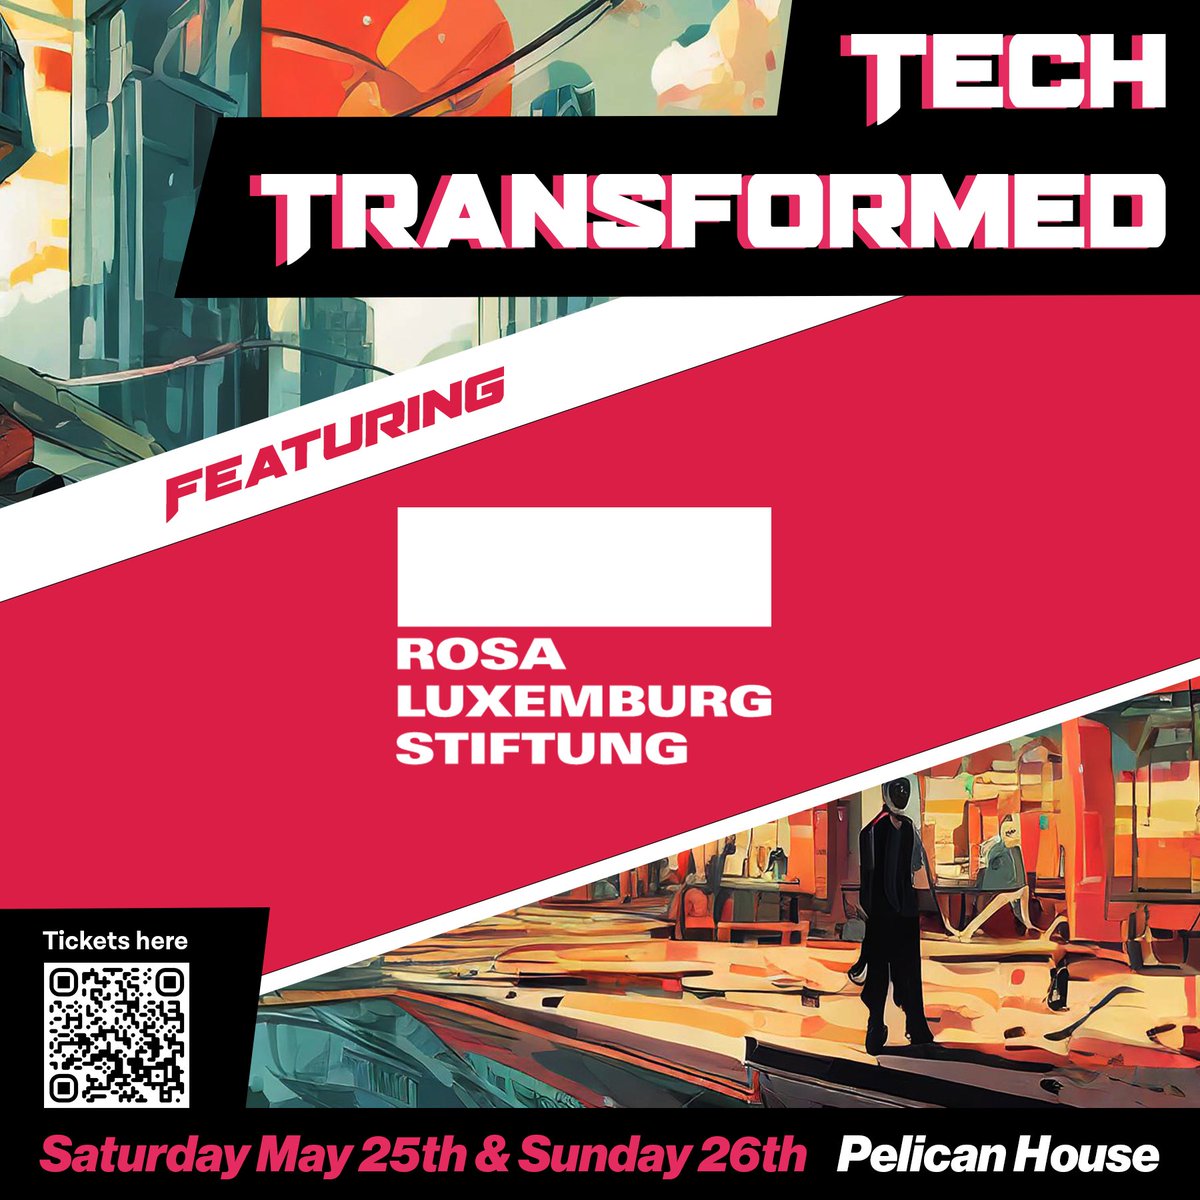 We're delighted to announce a new Tech Transformed partner organisation 😍 Alongside @TWT_NOW and @Autonomy_UK, @RosaluxLondon will be supporting us with the festival. There are still tickets available, get yours now 👉 buytickets.at/cada1/1198455